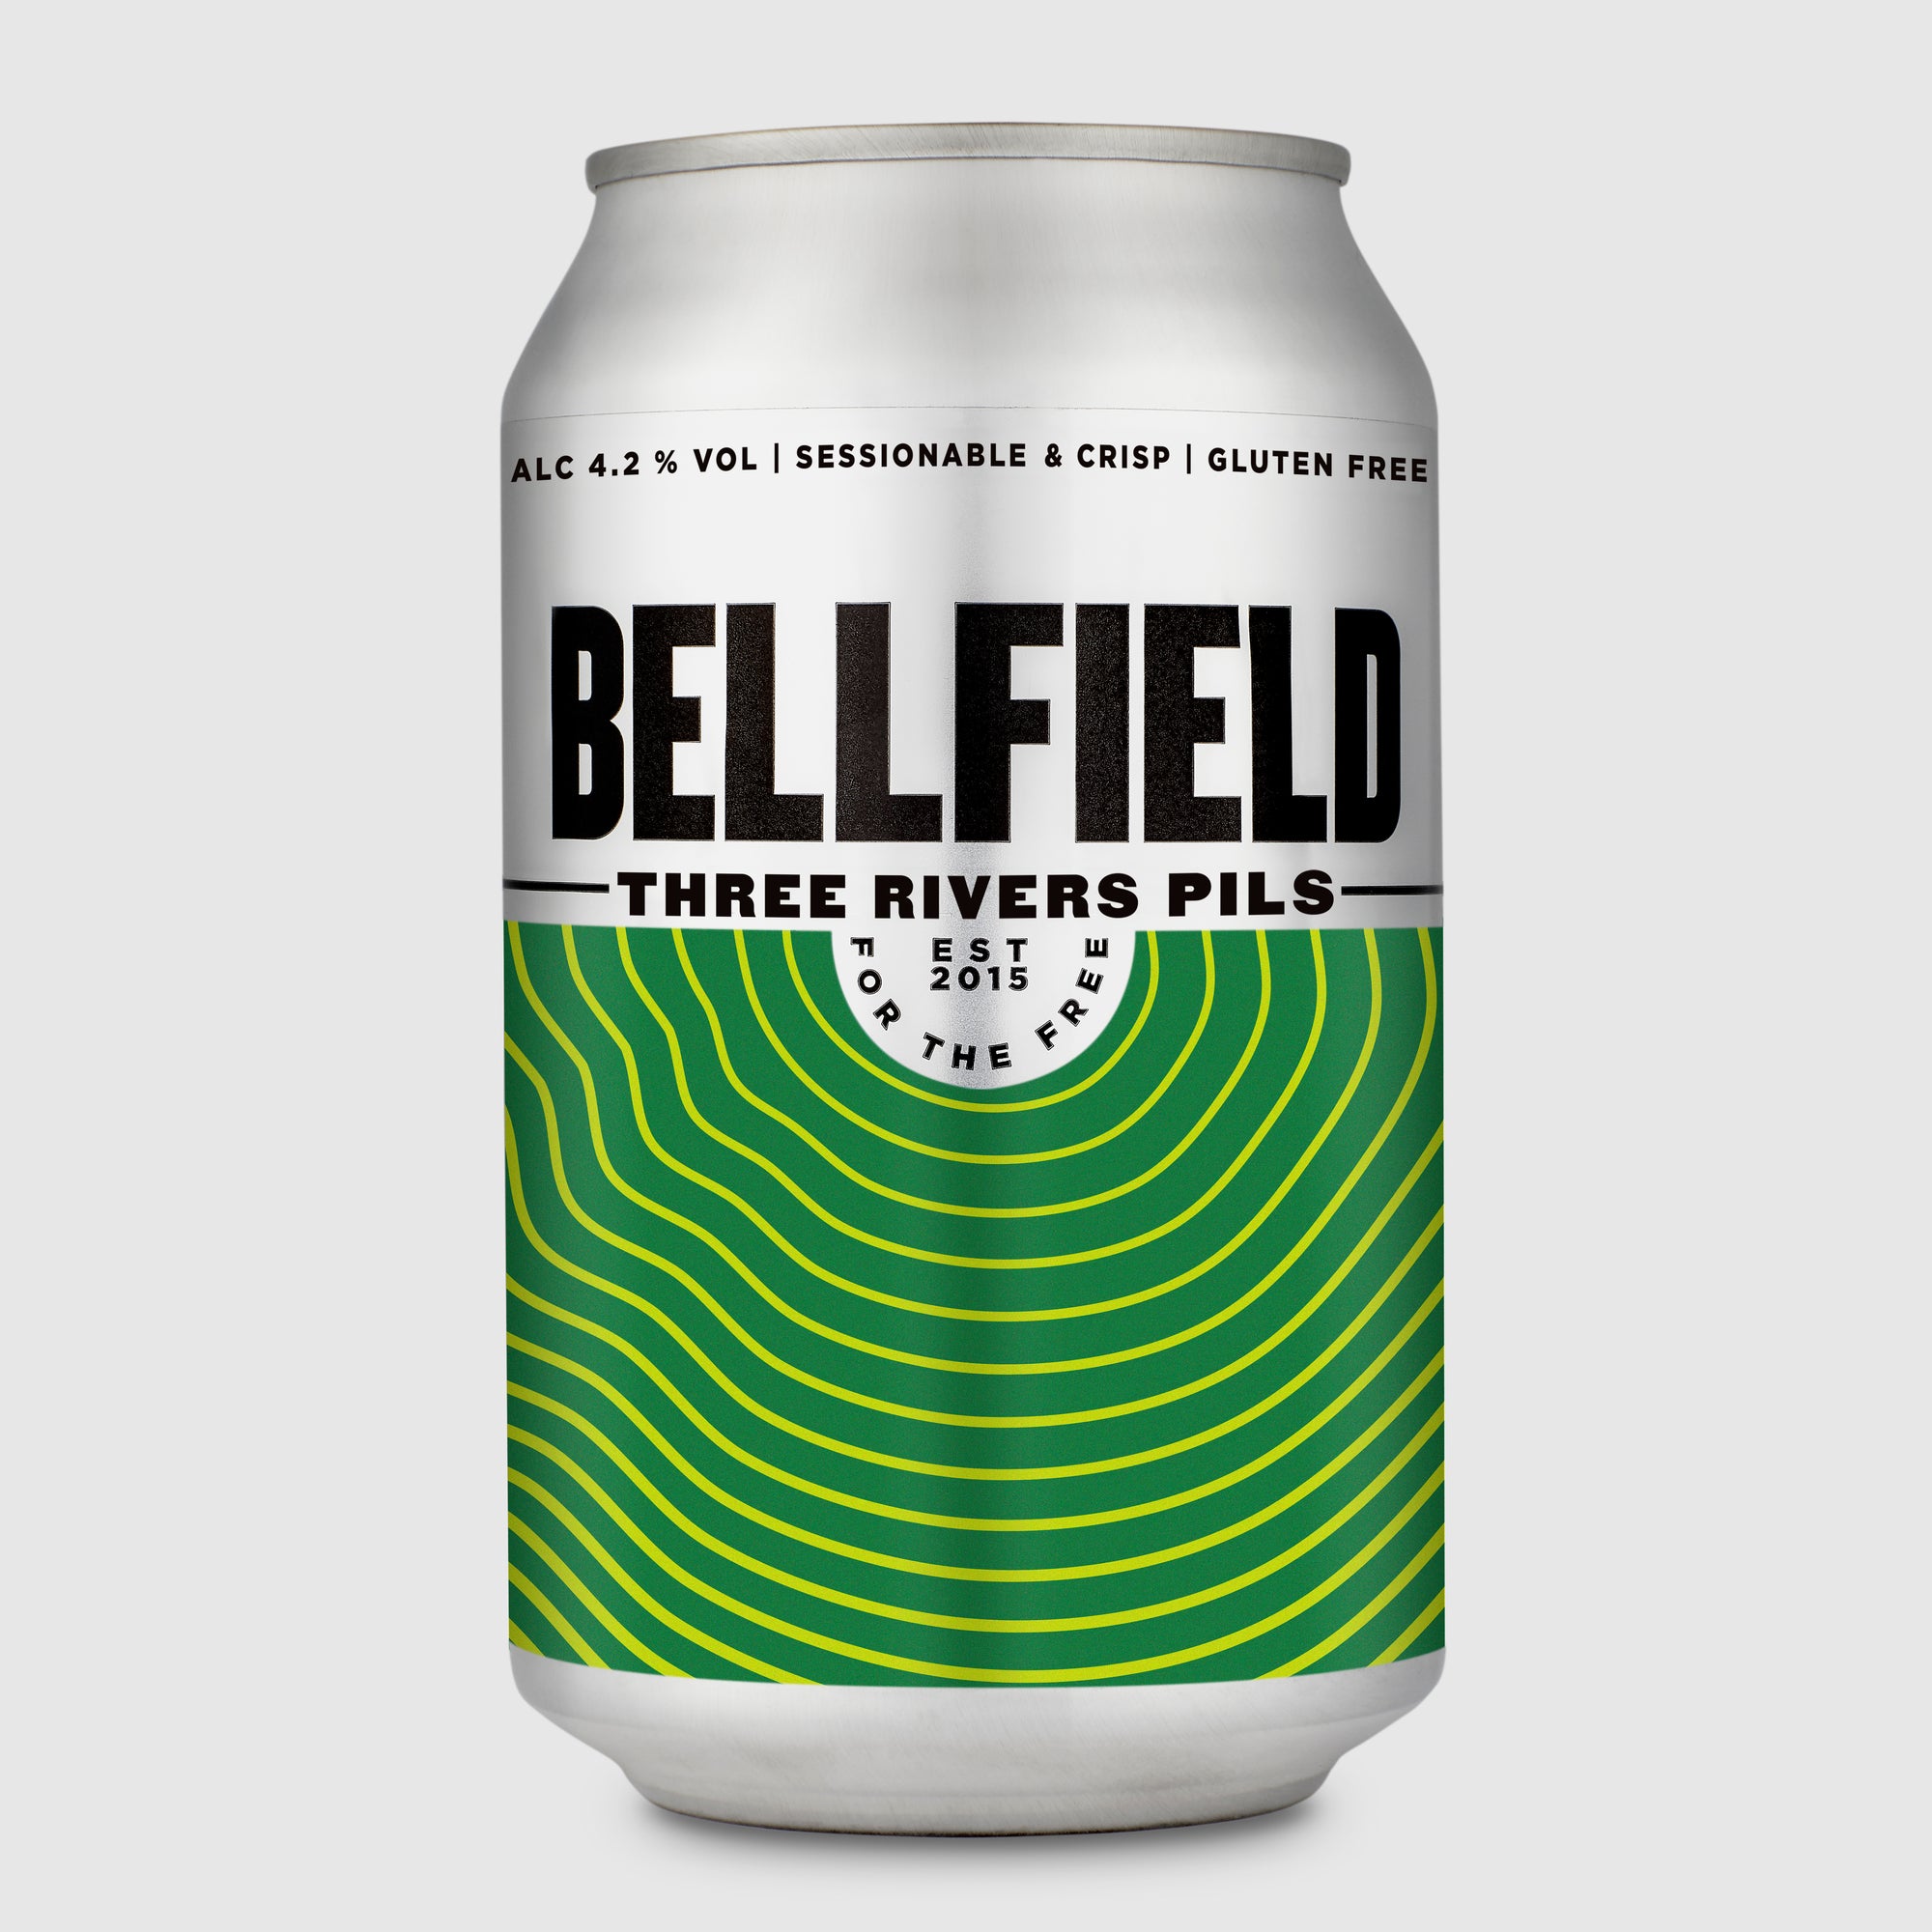 A 330ml can of sessionable and crisp Three Rivers Pils.